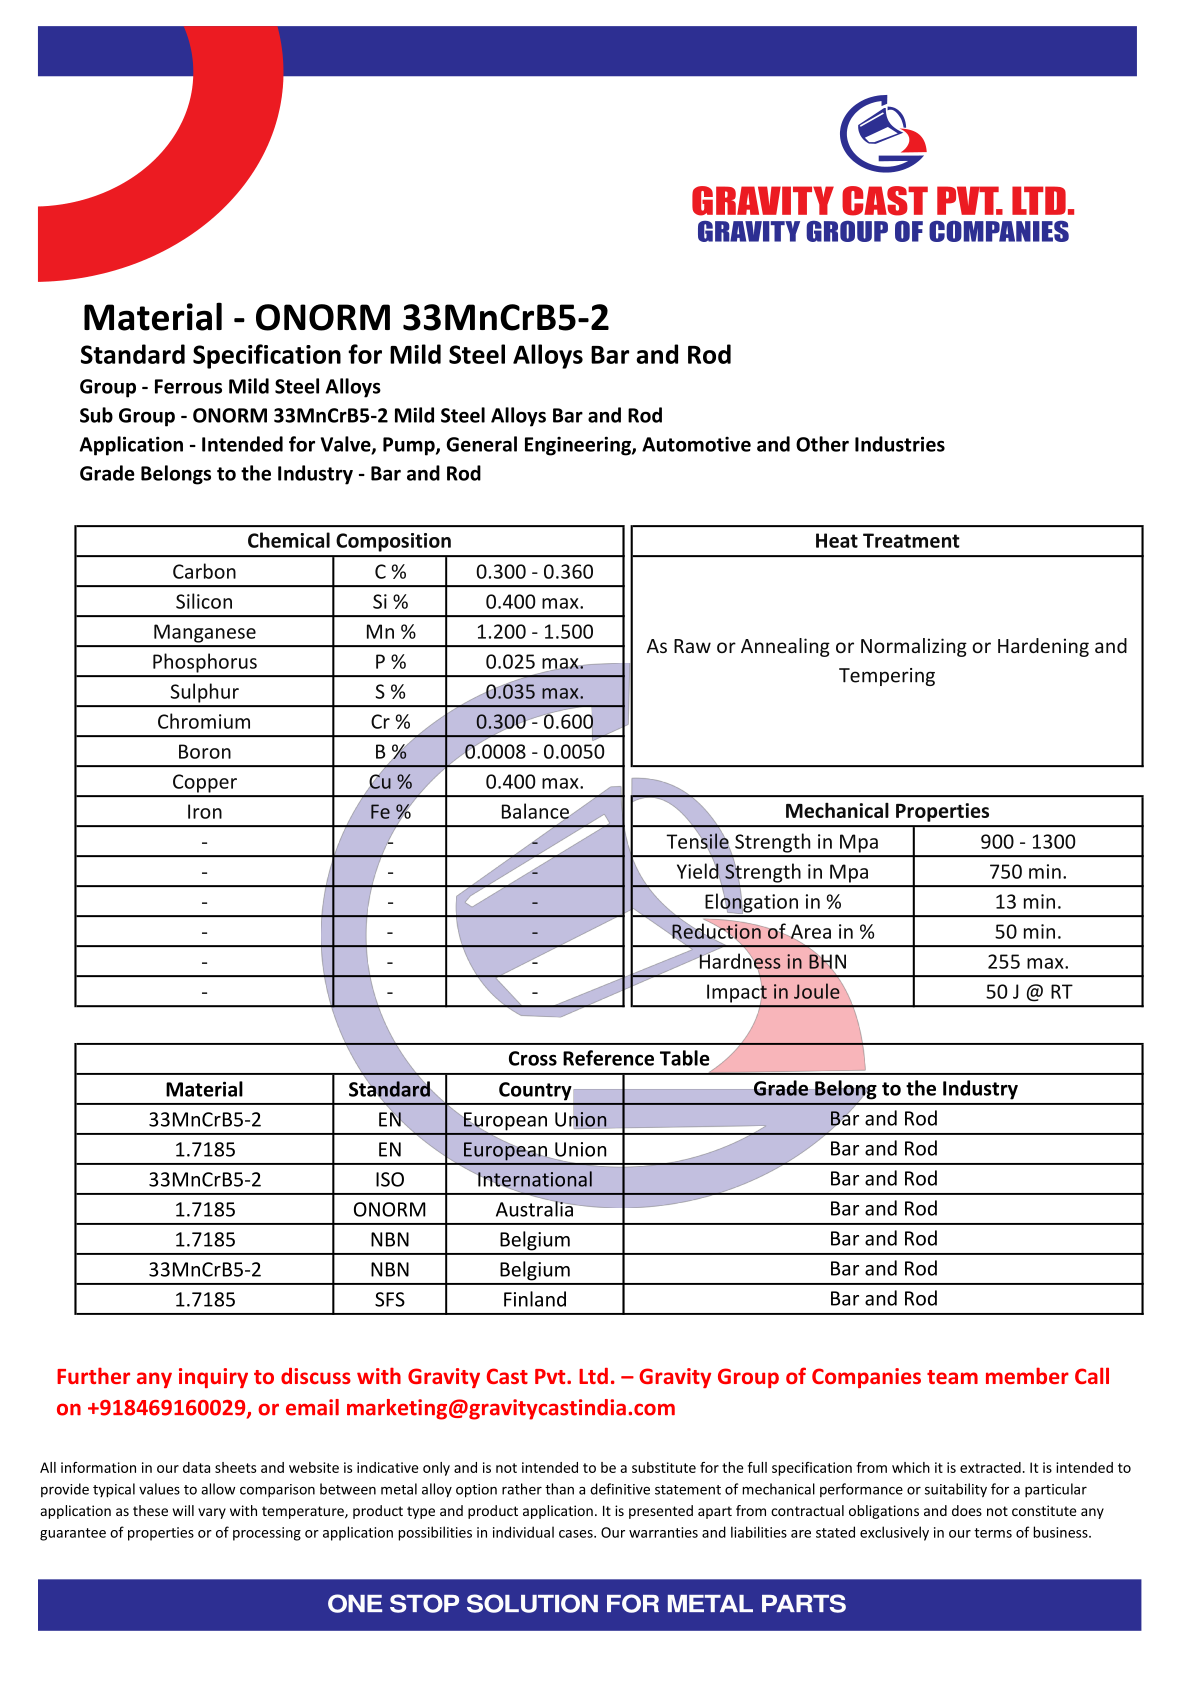 ONORM 33MnCrB5-2.pdf